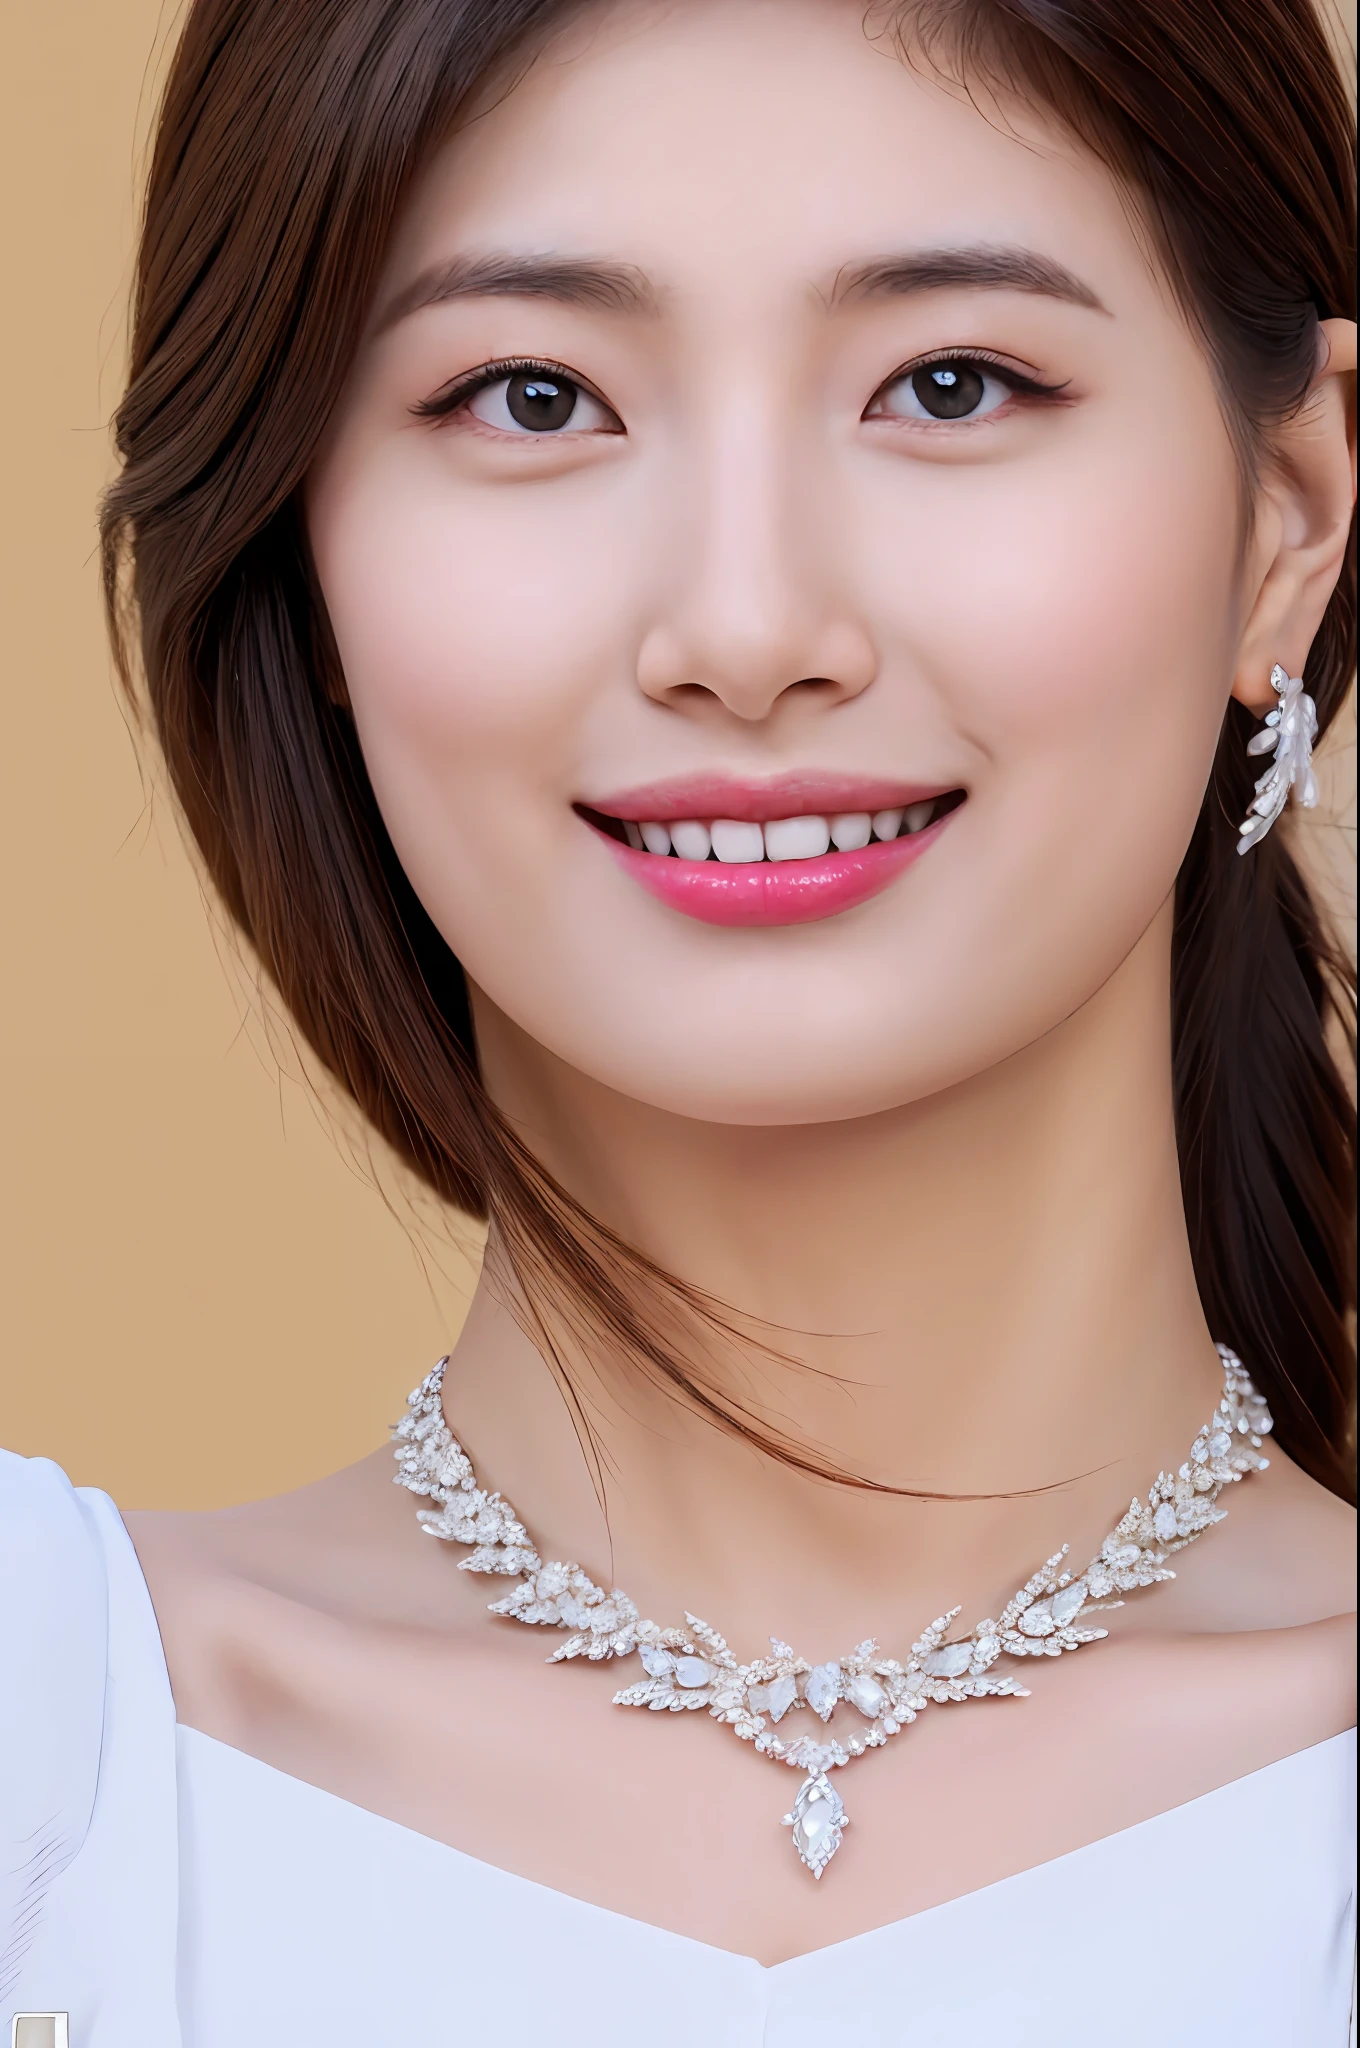 8K, Best quality, Masterpiece, Realistic, Super detail, f/1.2, 85mm, Nikon, Smiling woman with shiny hair, Natural makeup, white off-shoulder tops，Ruffled sleeves, Diamond pendant necklace